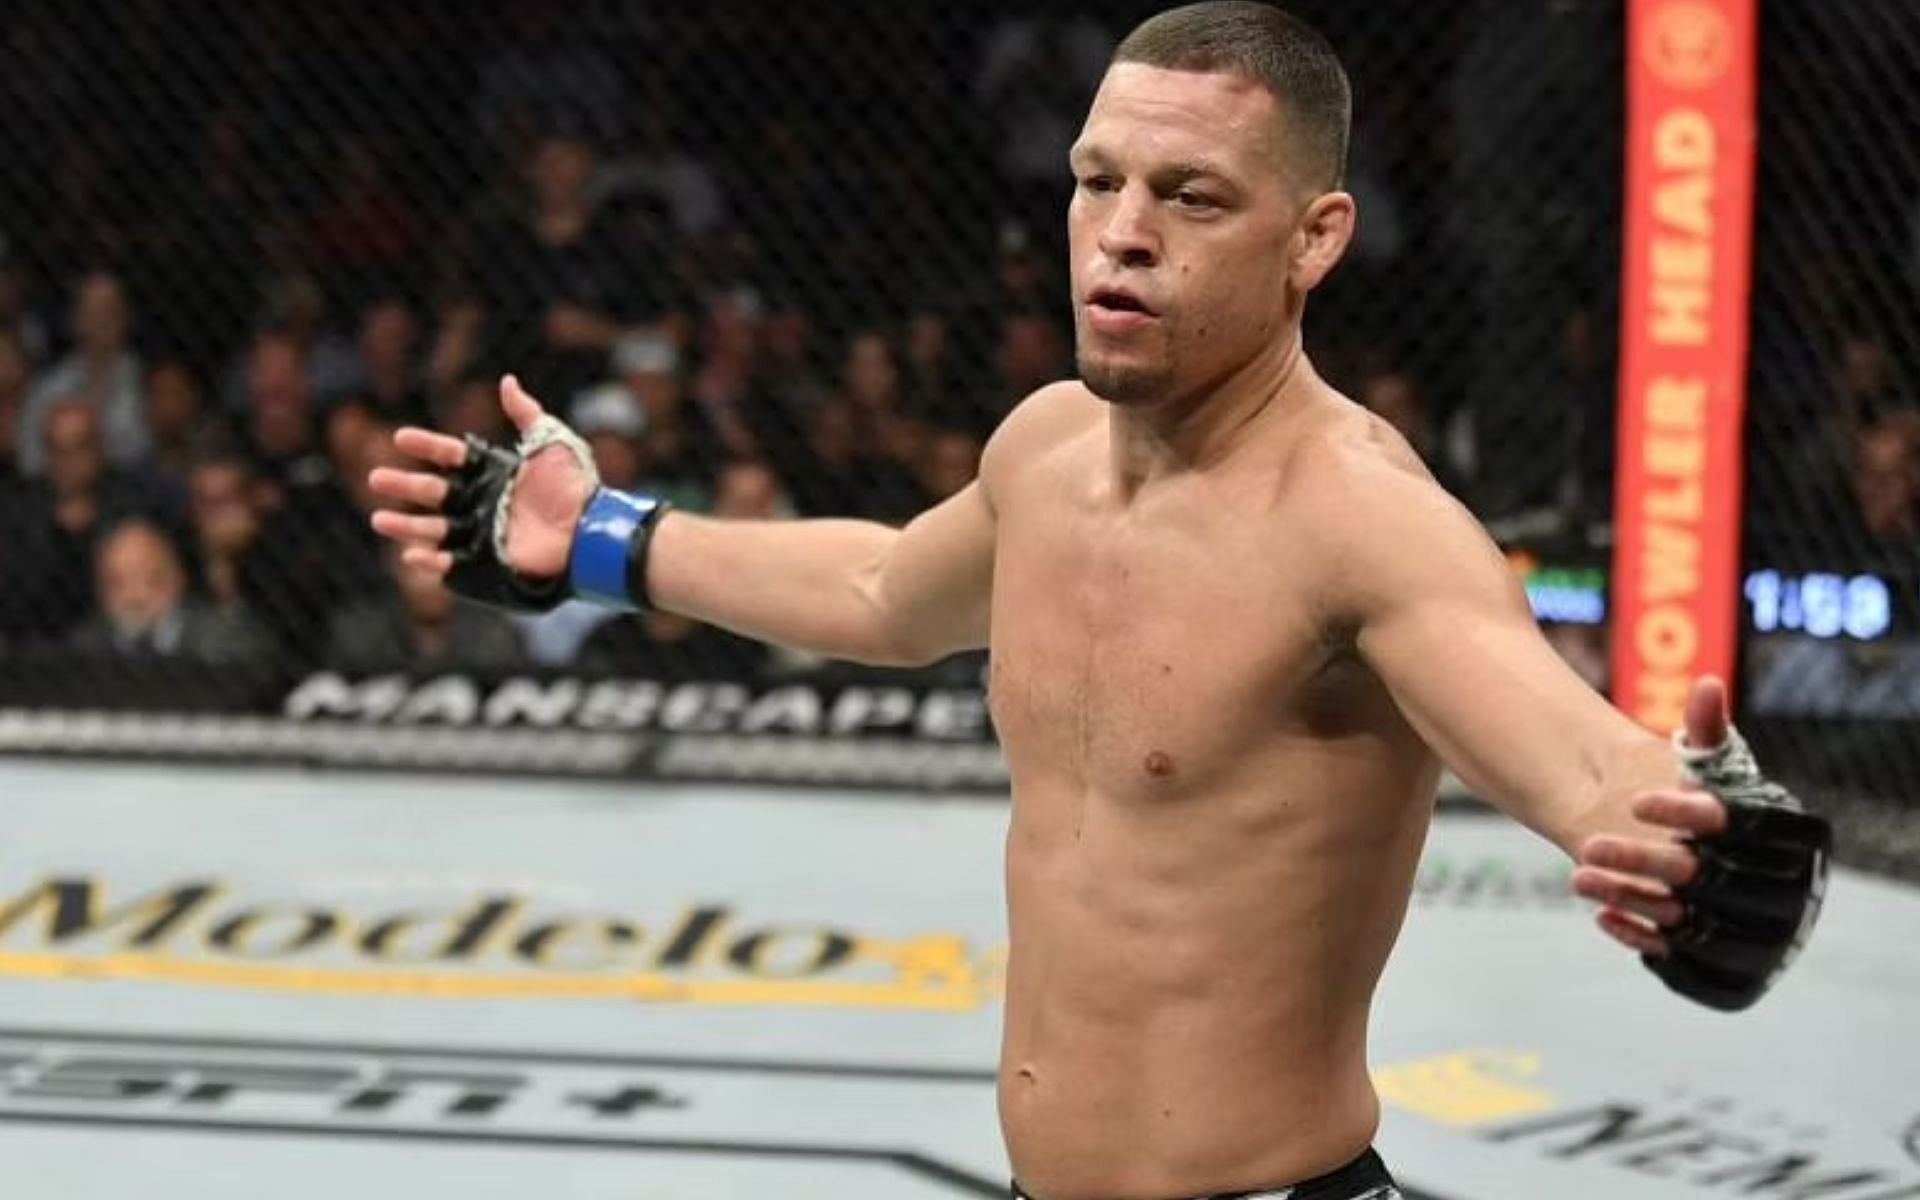 Nate Diaz is likely to leave the UFC after his next fight